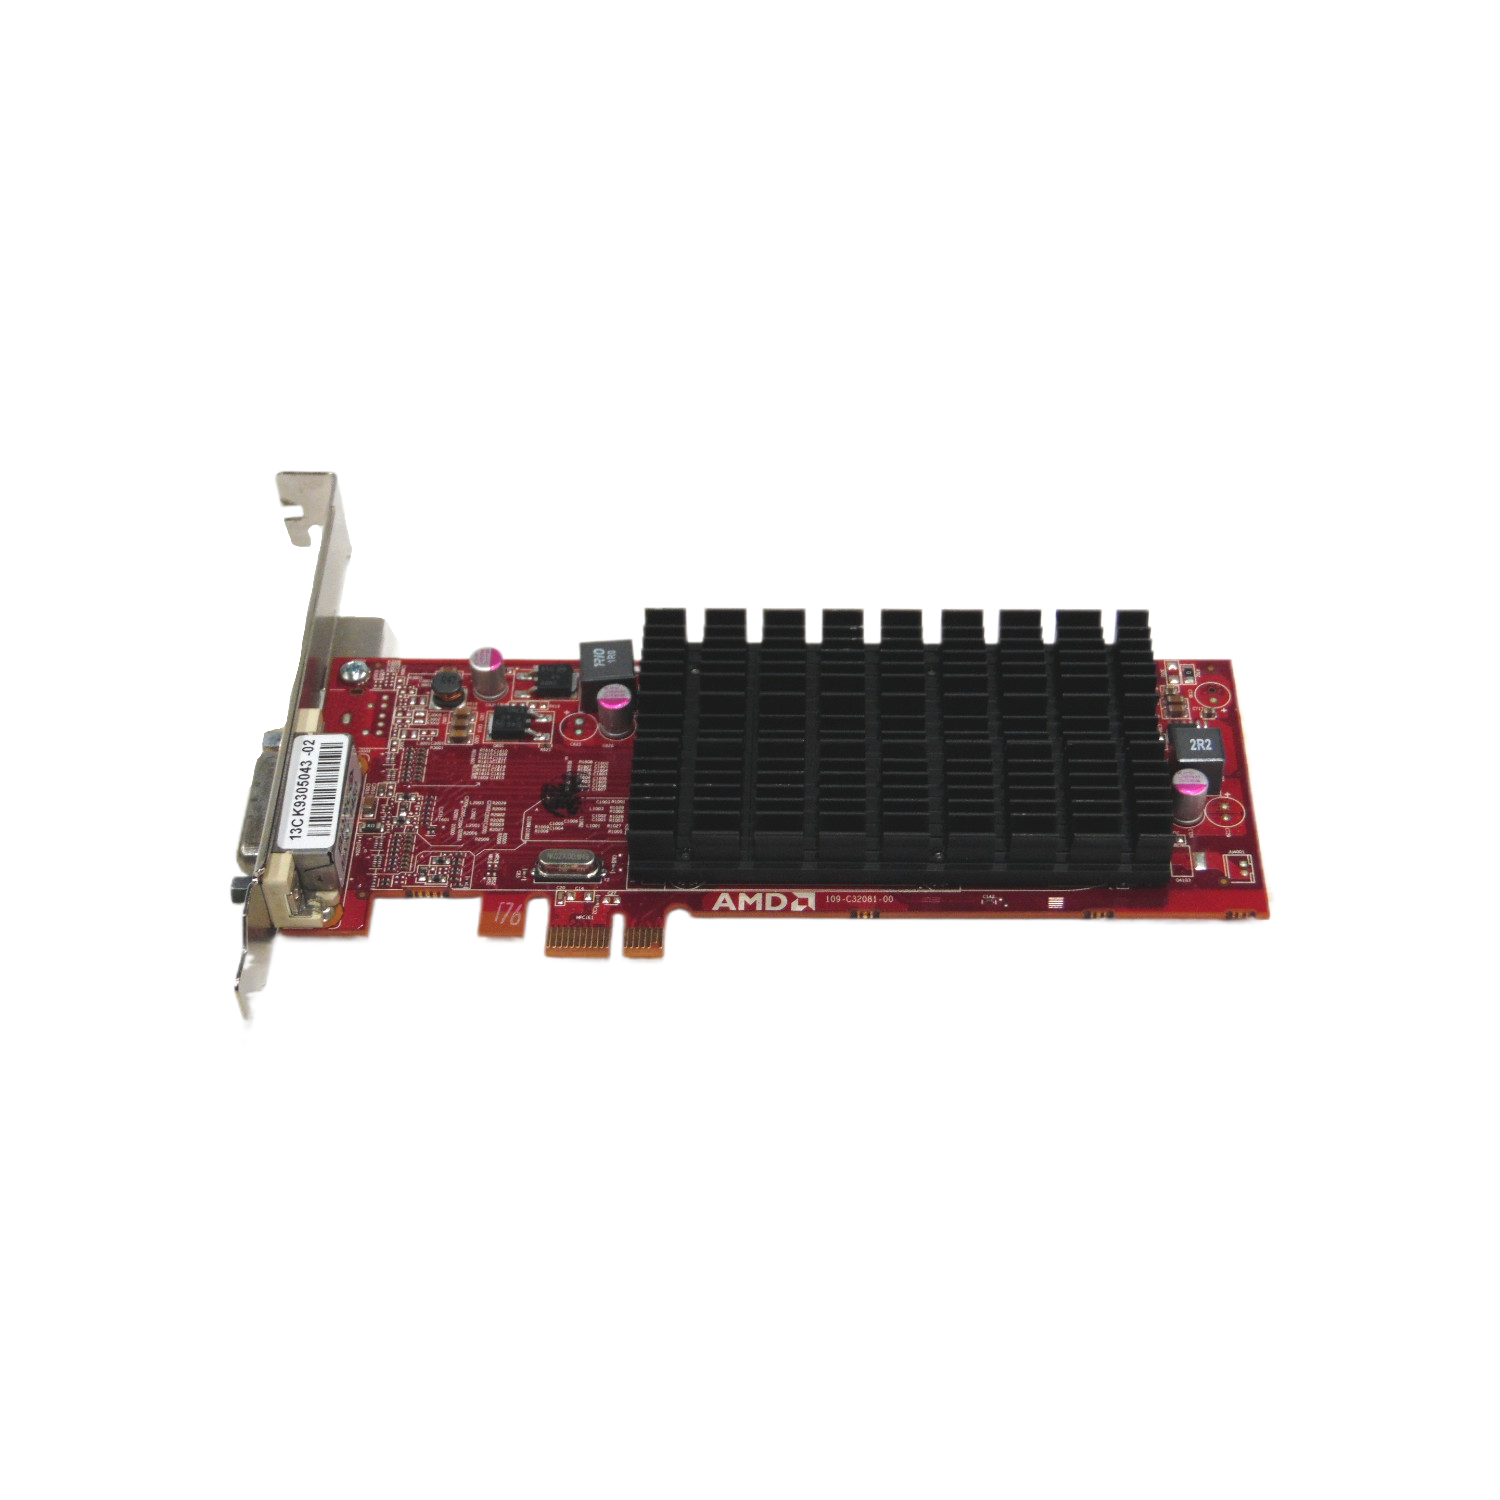 AMD ATI MXRT-1450 FirePro 512 MB DDR3 SDRAM PCI Express 2.0 x1 Low-profile Single Slot Space Required Workstation Graphics Card